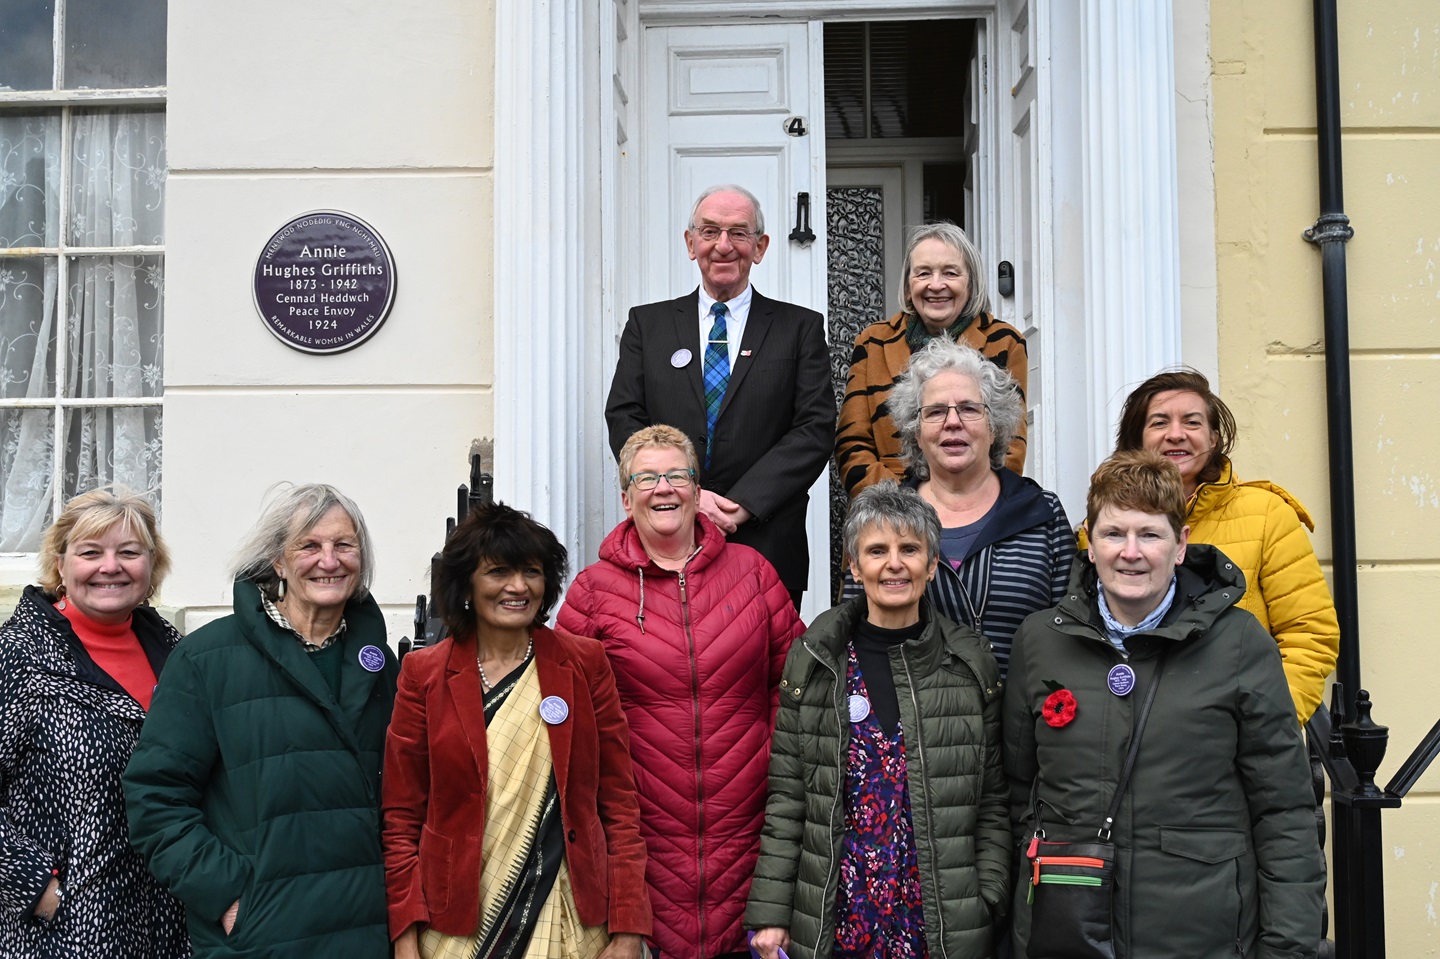 Plaque unveiling with guests including Rolant Elis (grandson), Meg Elis (granddaughter), Vice-Chancellor of Aberystwyth University Professor Elizabeth Treasure, Eluned Morgan MS, and members of the Welsh Purple Plaques Committee.